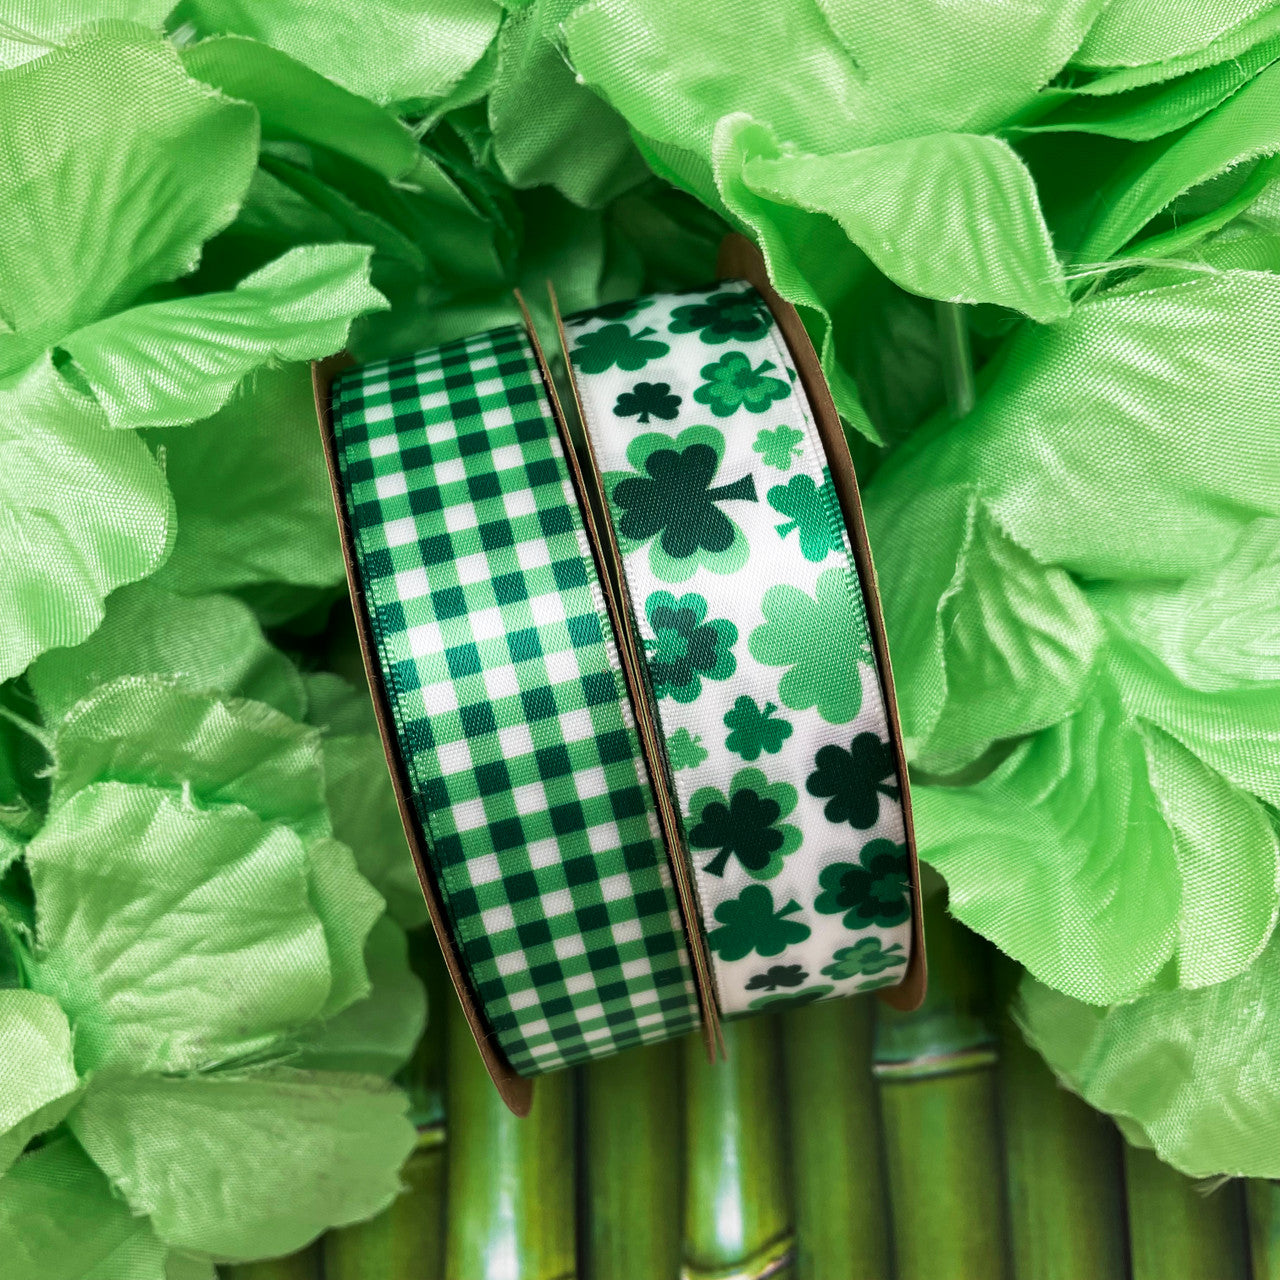 Mix and match our 7/8" shamrocks with our green and white gingham for a truly festive St. Patrick's celebration!